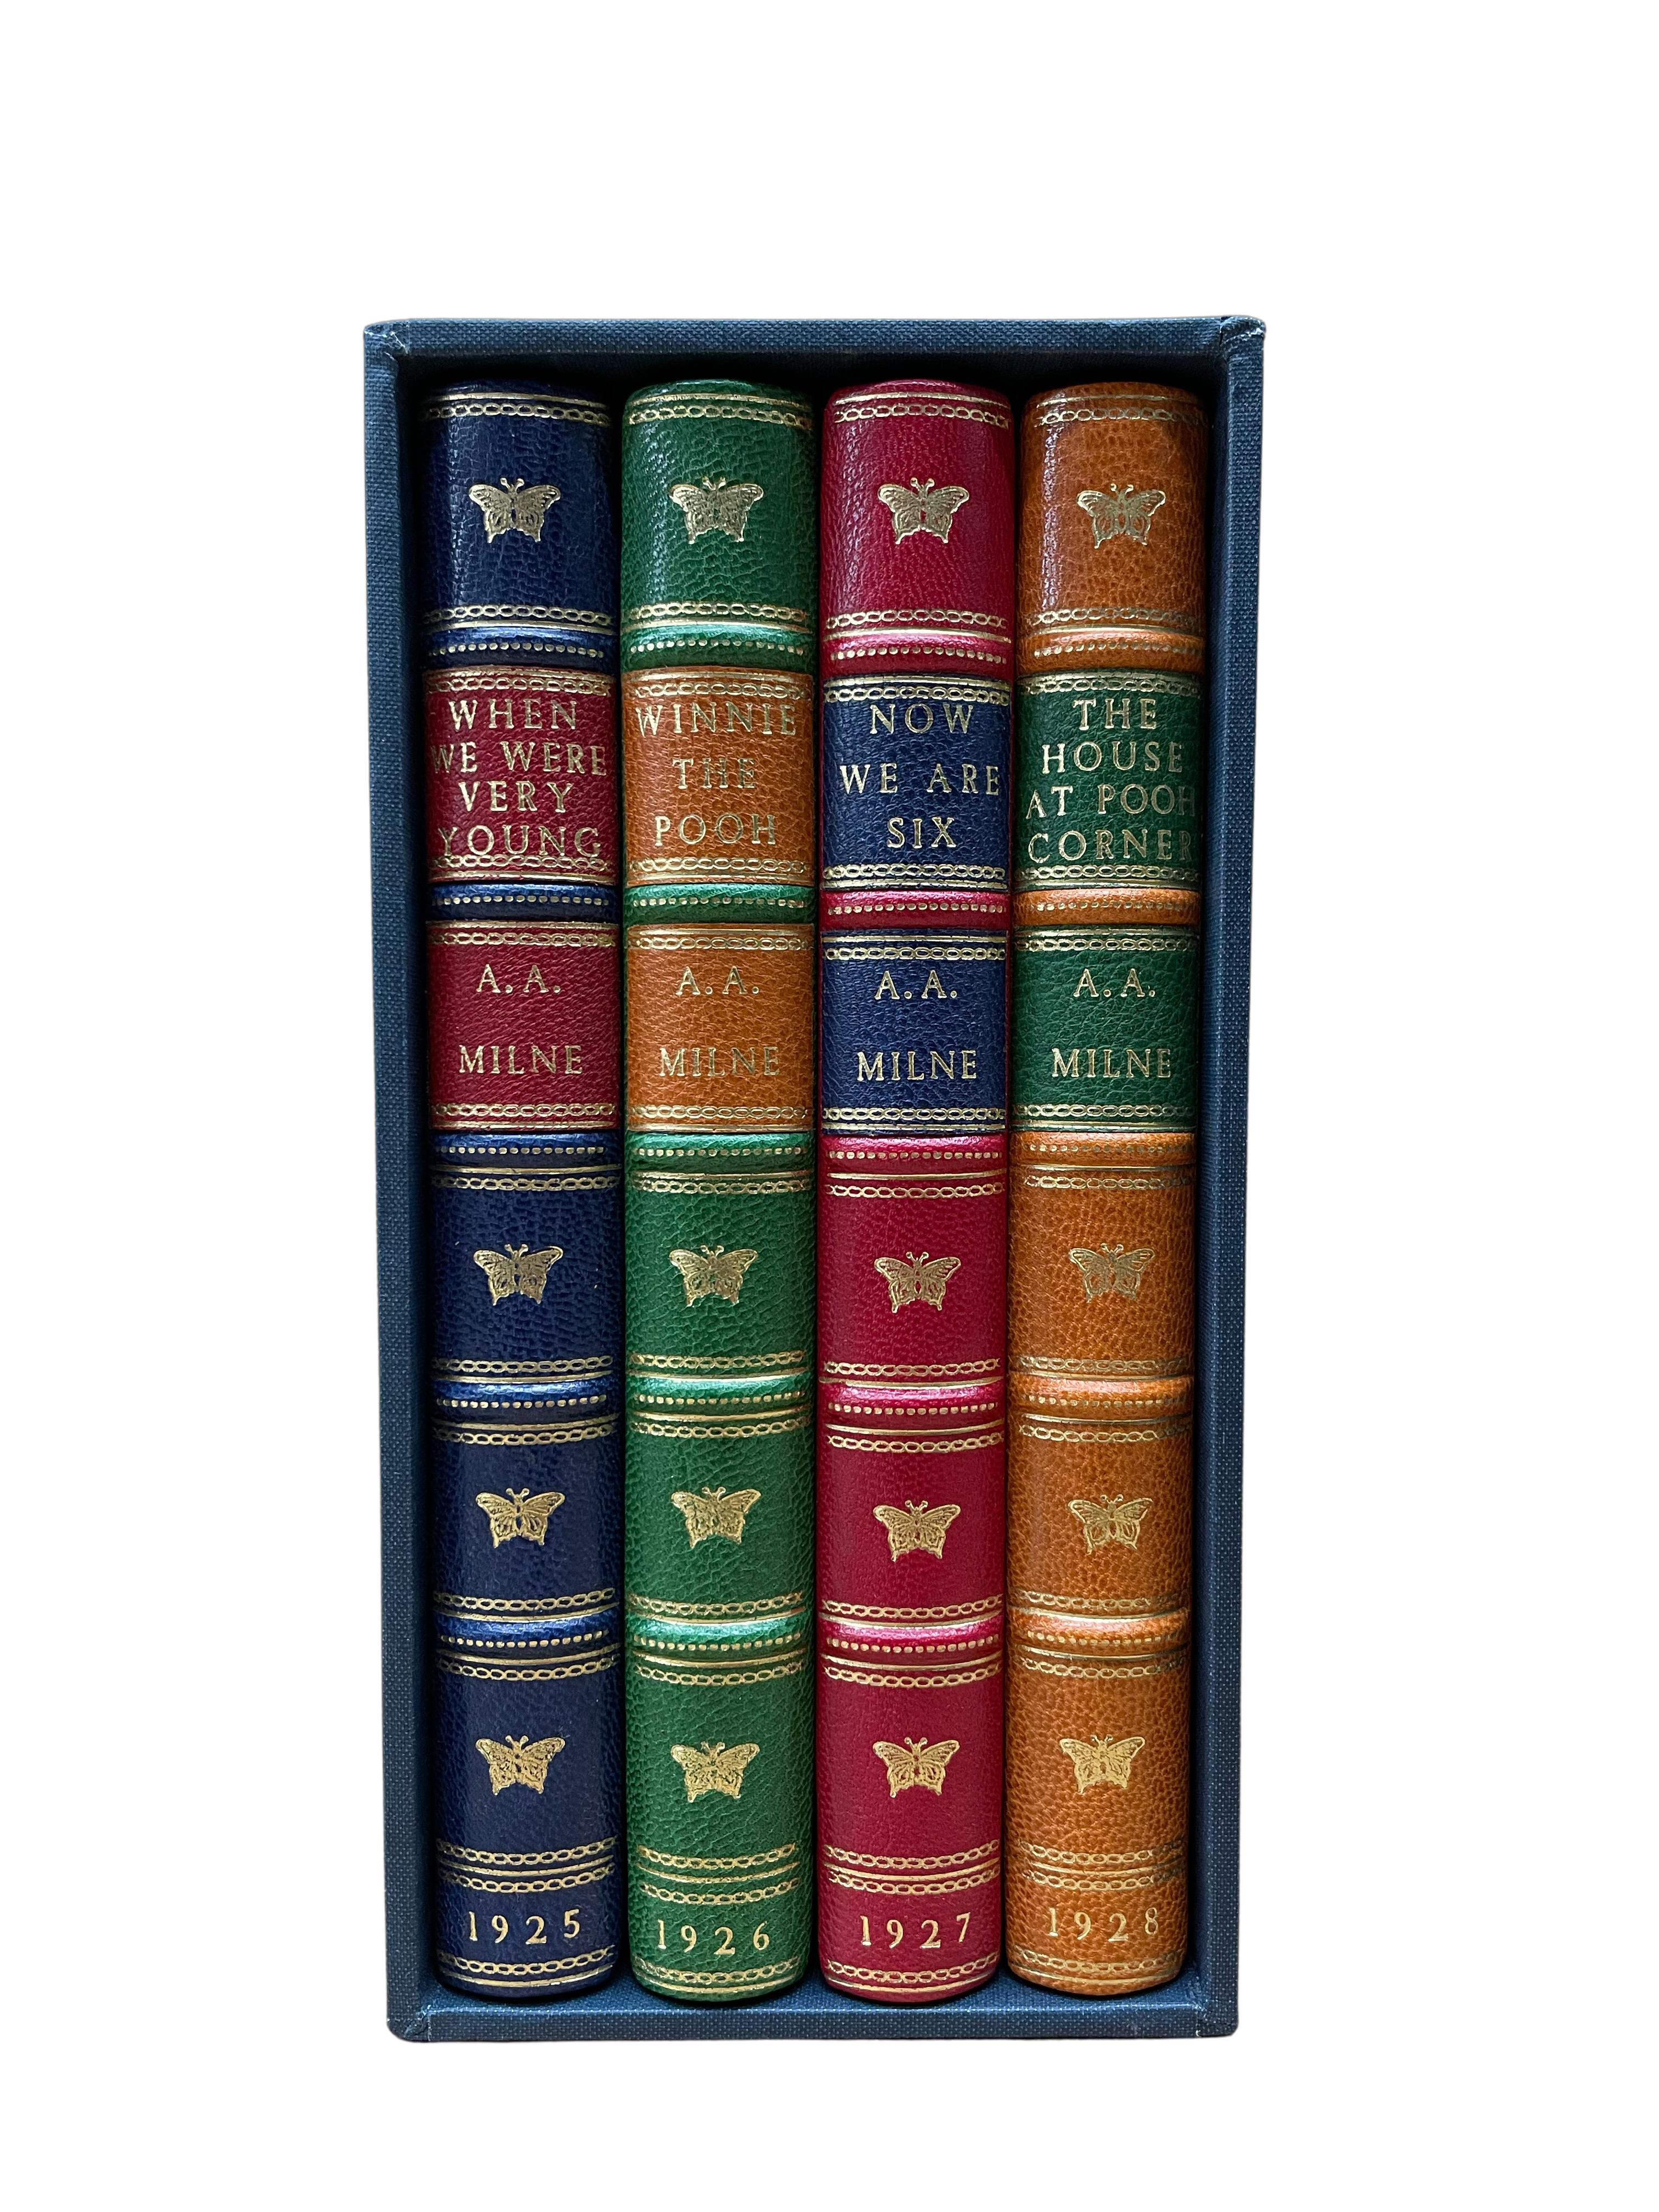 This is a complete deluxe edition set of A. A. Milne's classic children's books based on the adventures of Christopher Robin and Winnie the Pooh. The set includes four first edition, deluxe issue volumes. These four volumes are illustrated